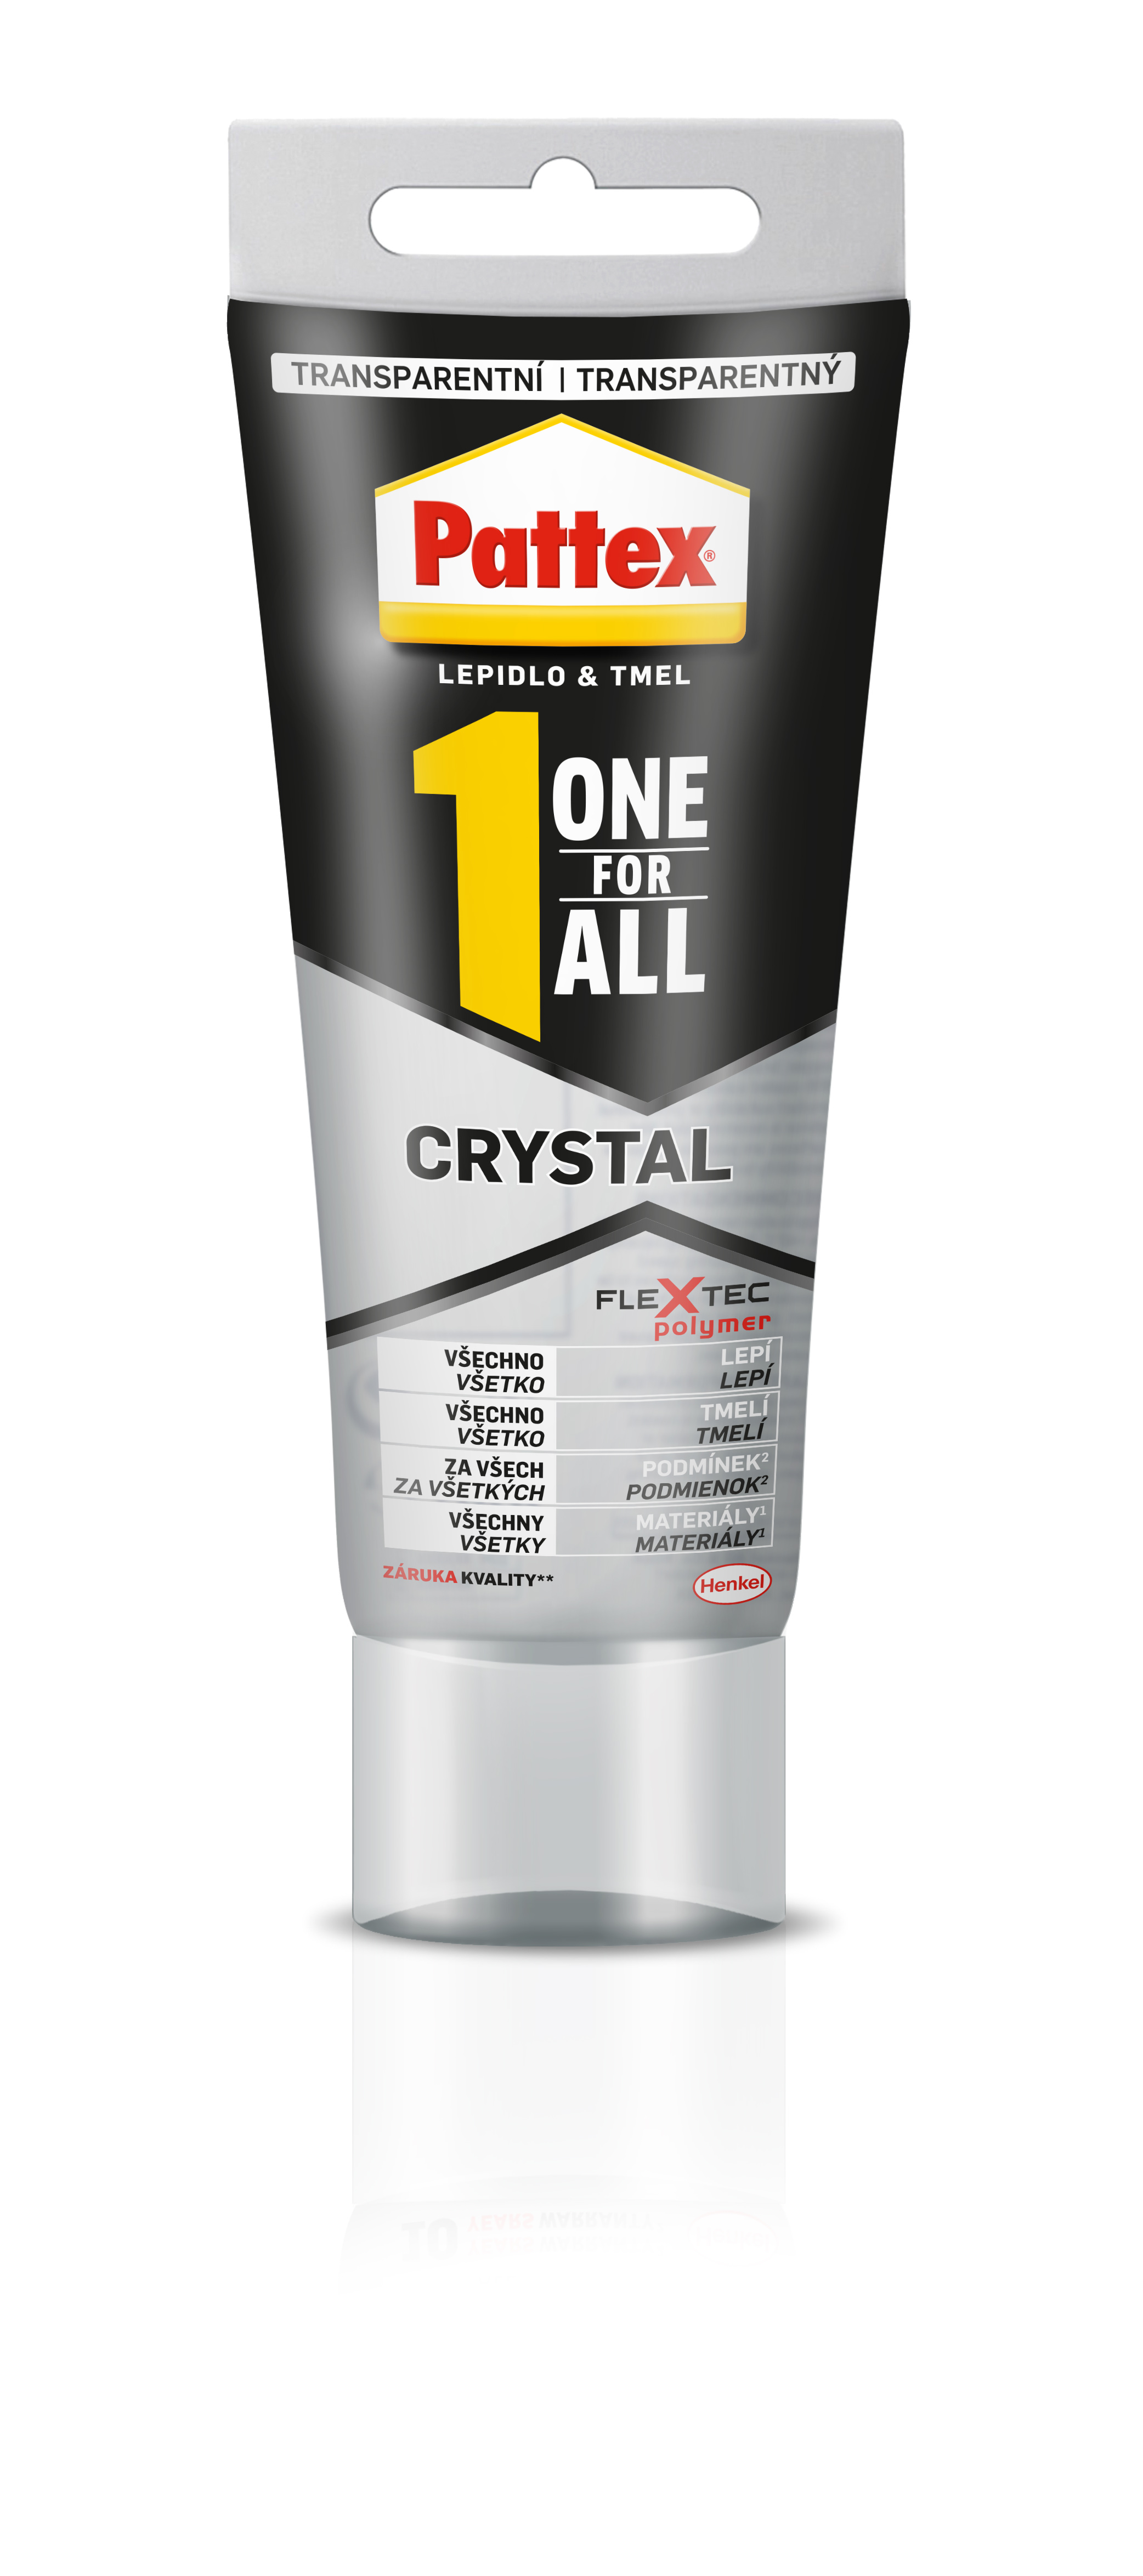 Pattex ONE For All CRYSTAL tuba 80 ml